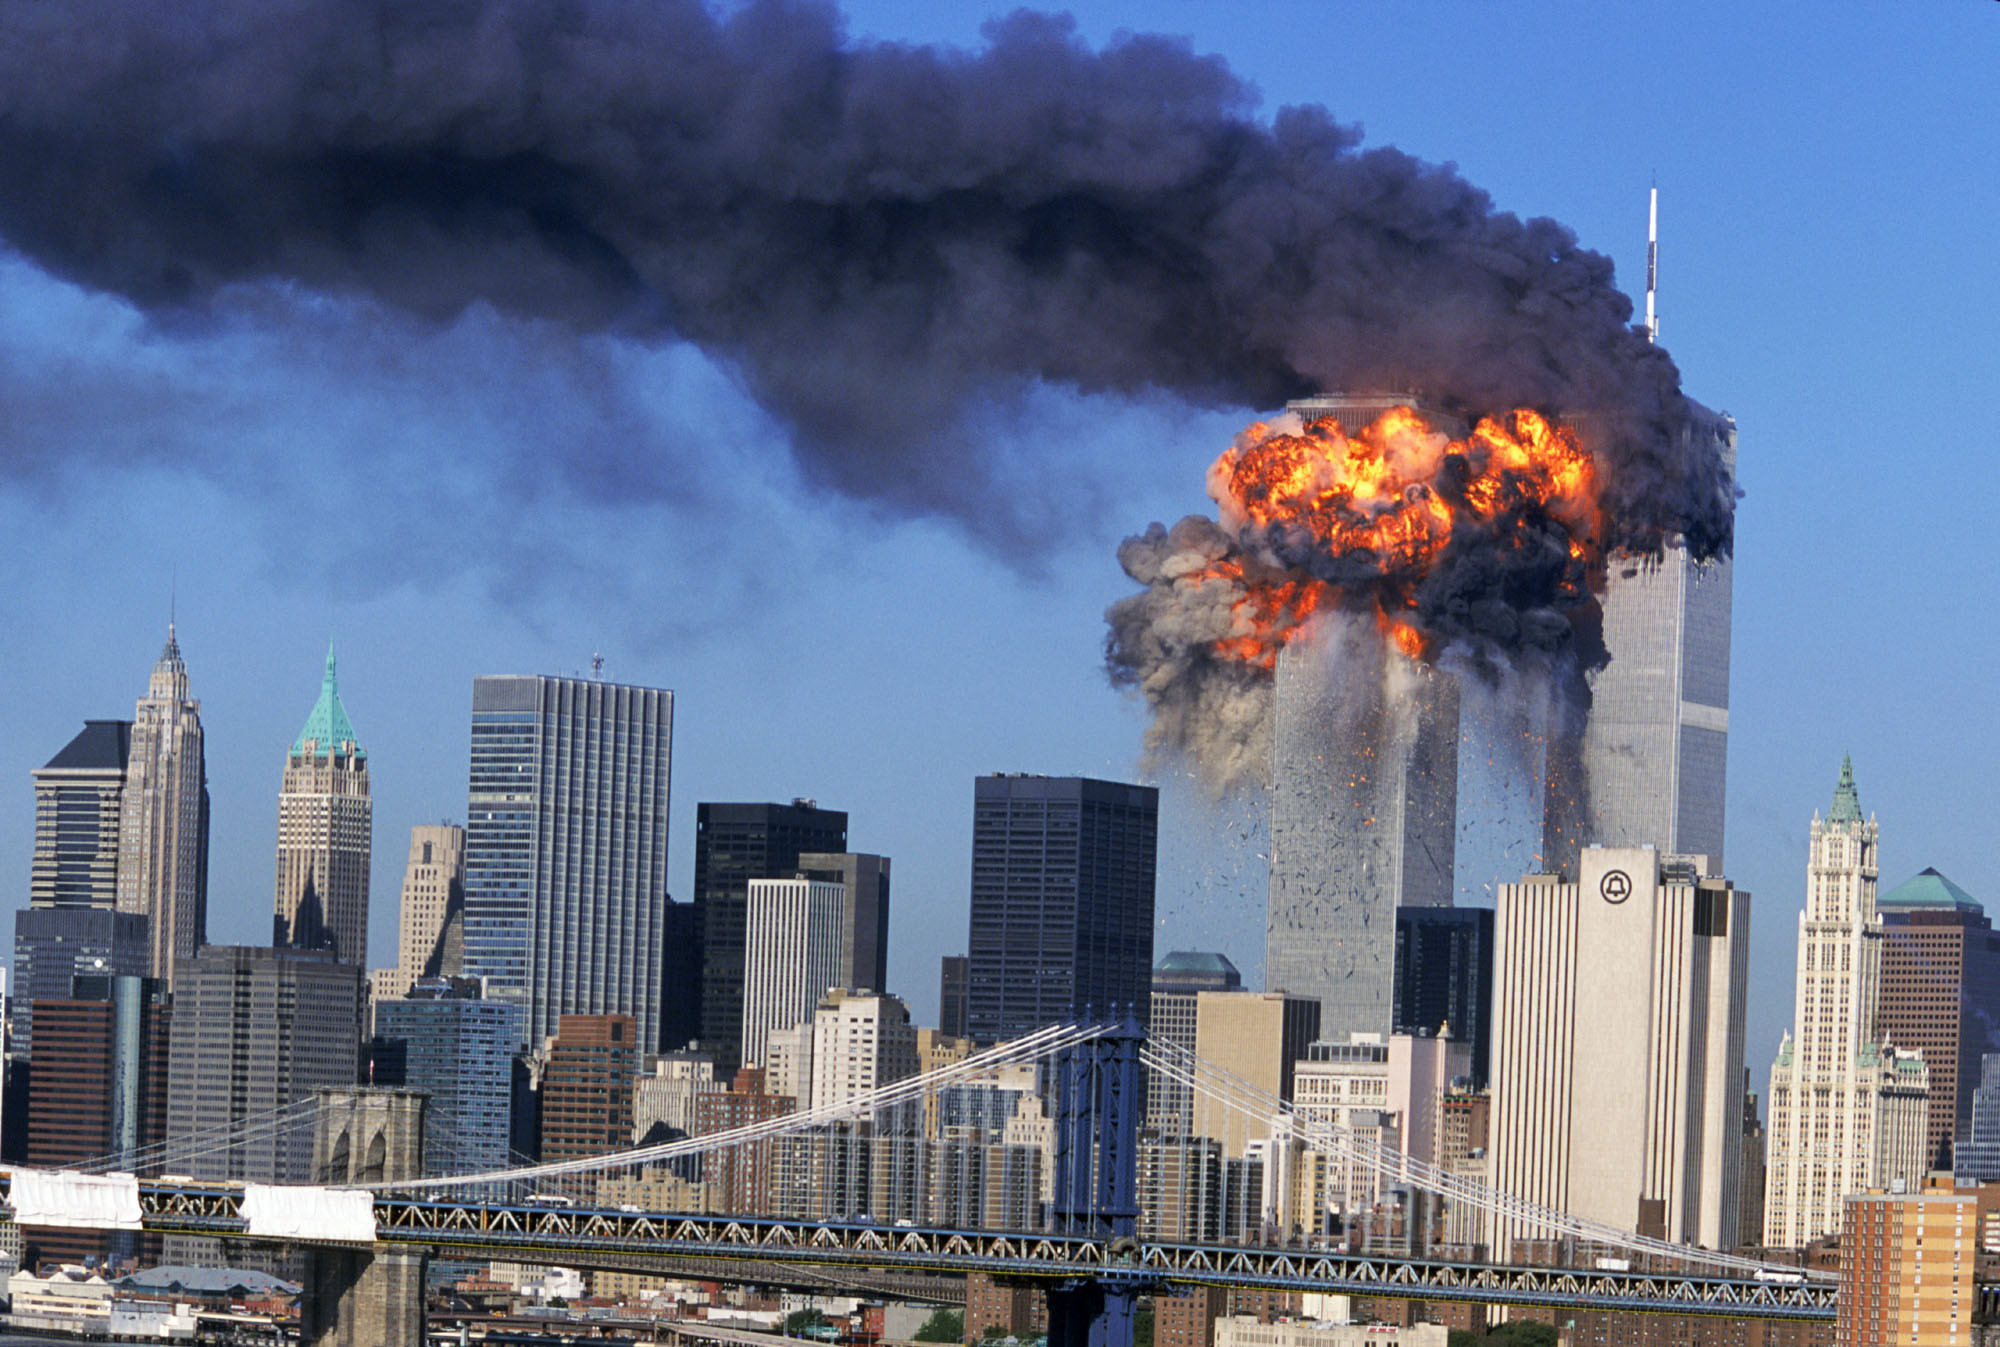 From the Archive: World Trade Center and Pentagon attacked on Sept. 11, 2001